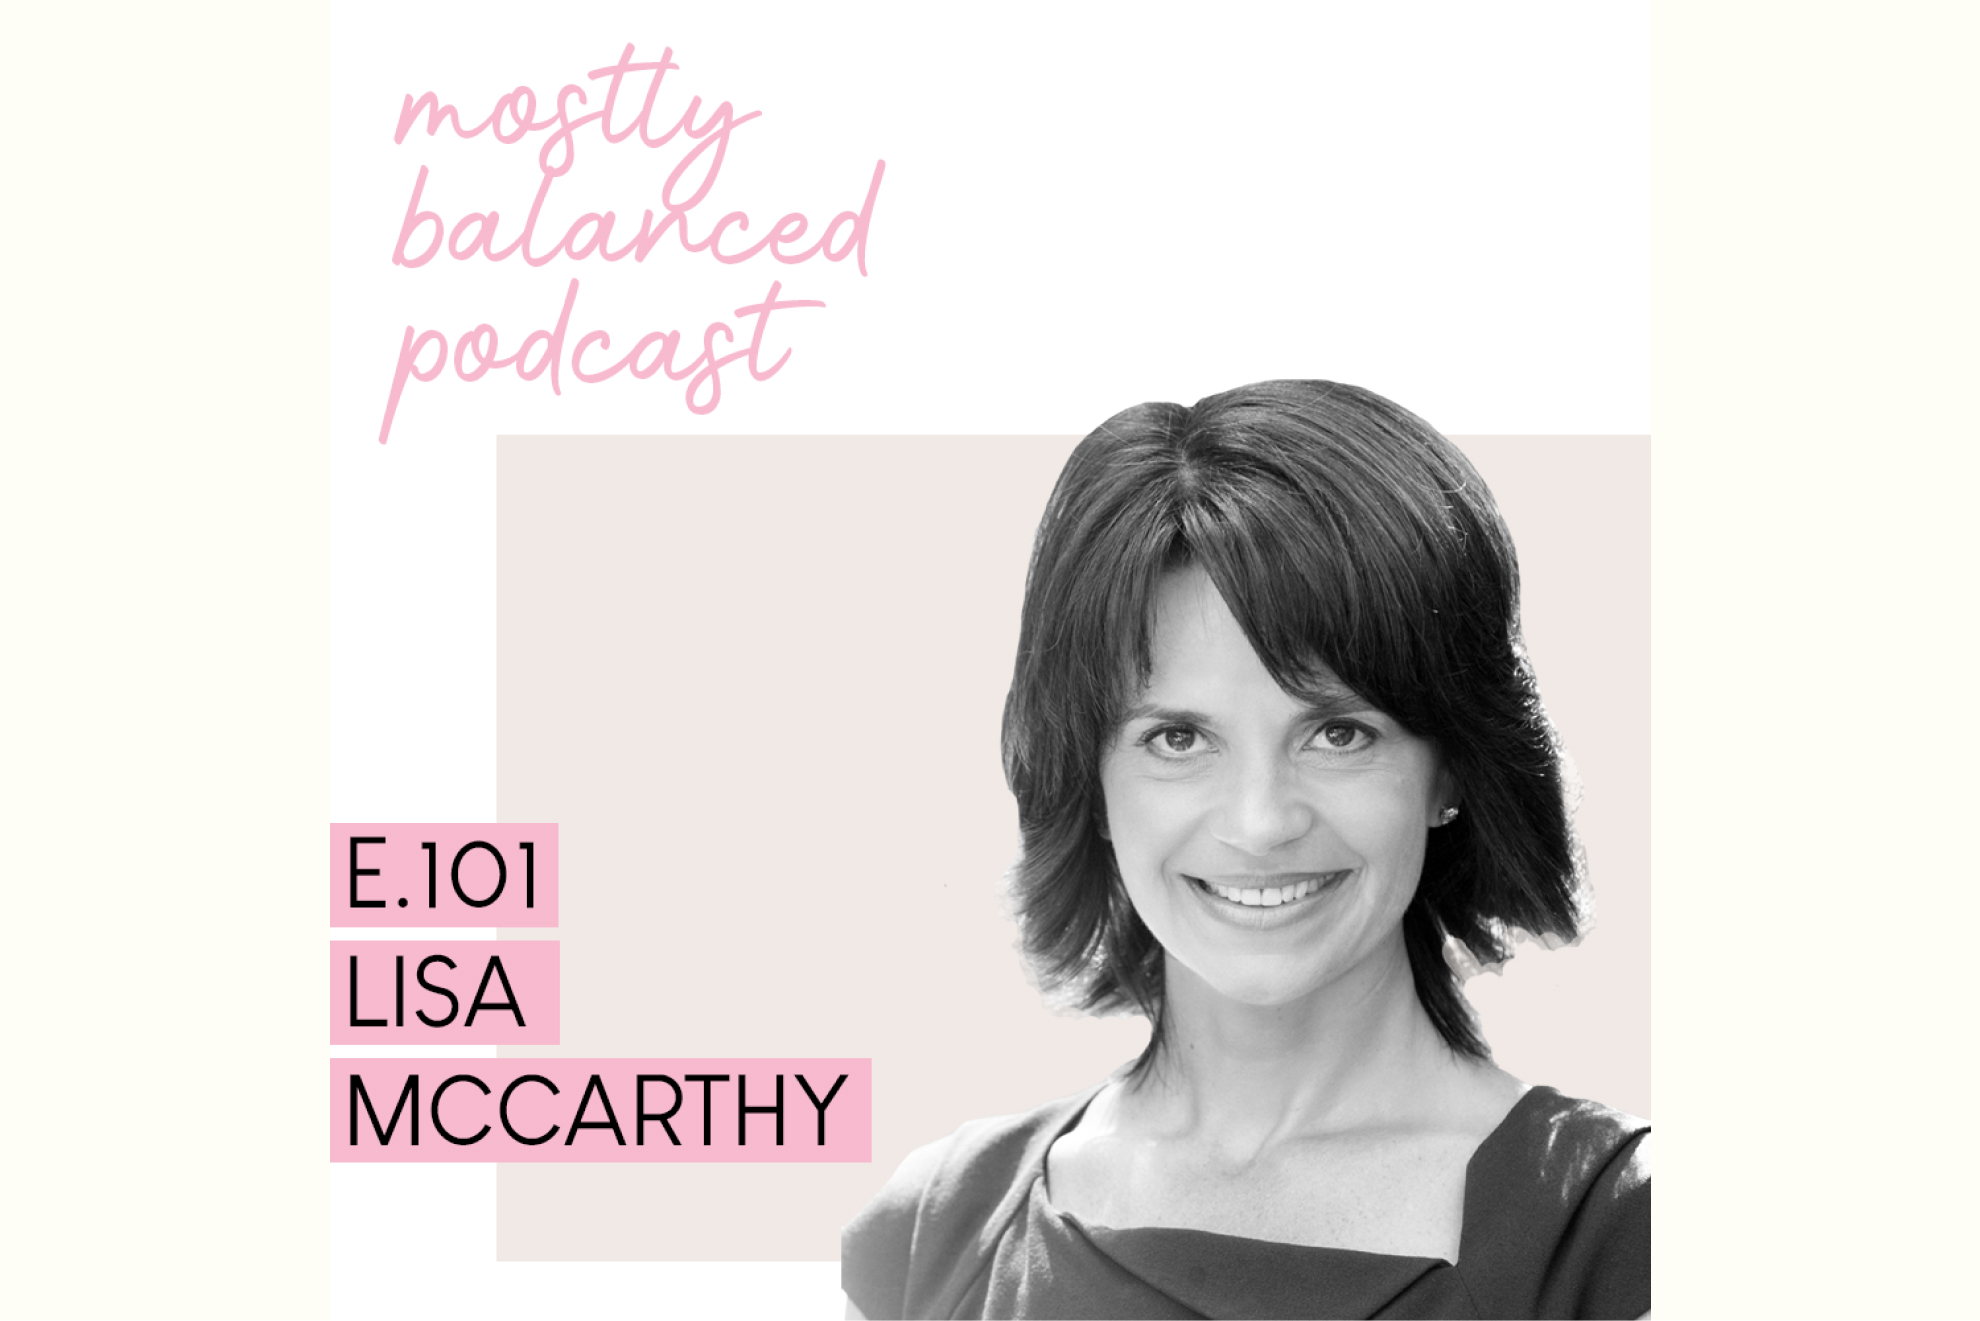 Lisa McCarthy joins the Mostly Balanced podcast